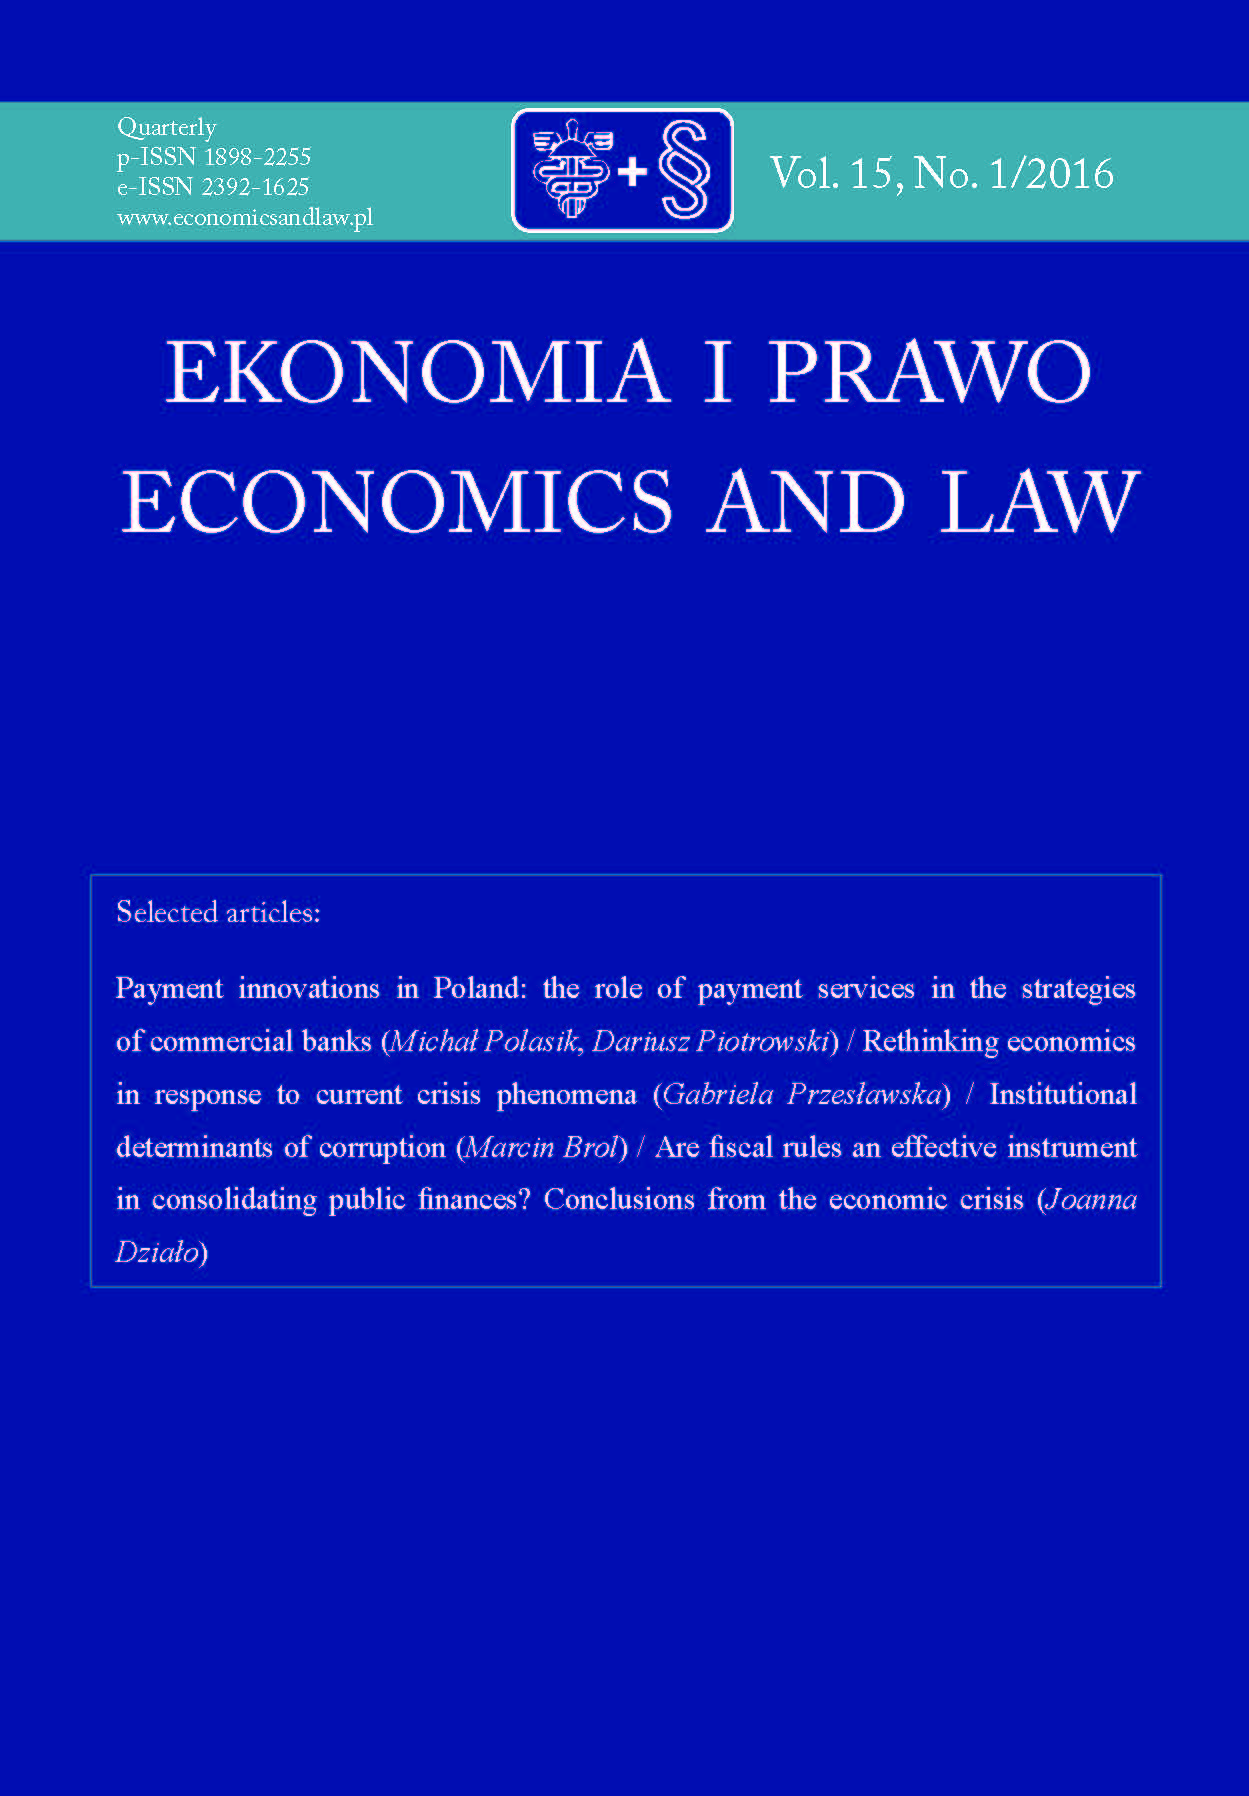 THE ISSUE OF ECONOMIC CRISES AND CYCLICAL FLUCTUATIONS IN POLISH ECONOMIC THOUGHT IN THE INTERWAR PERIOD